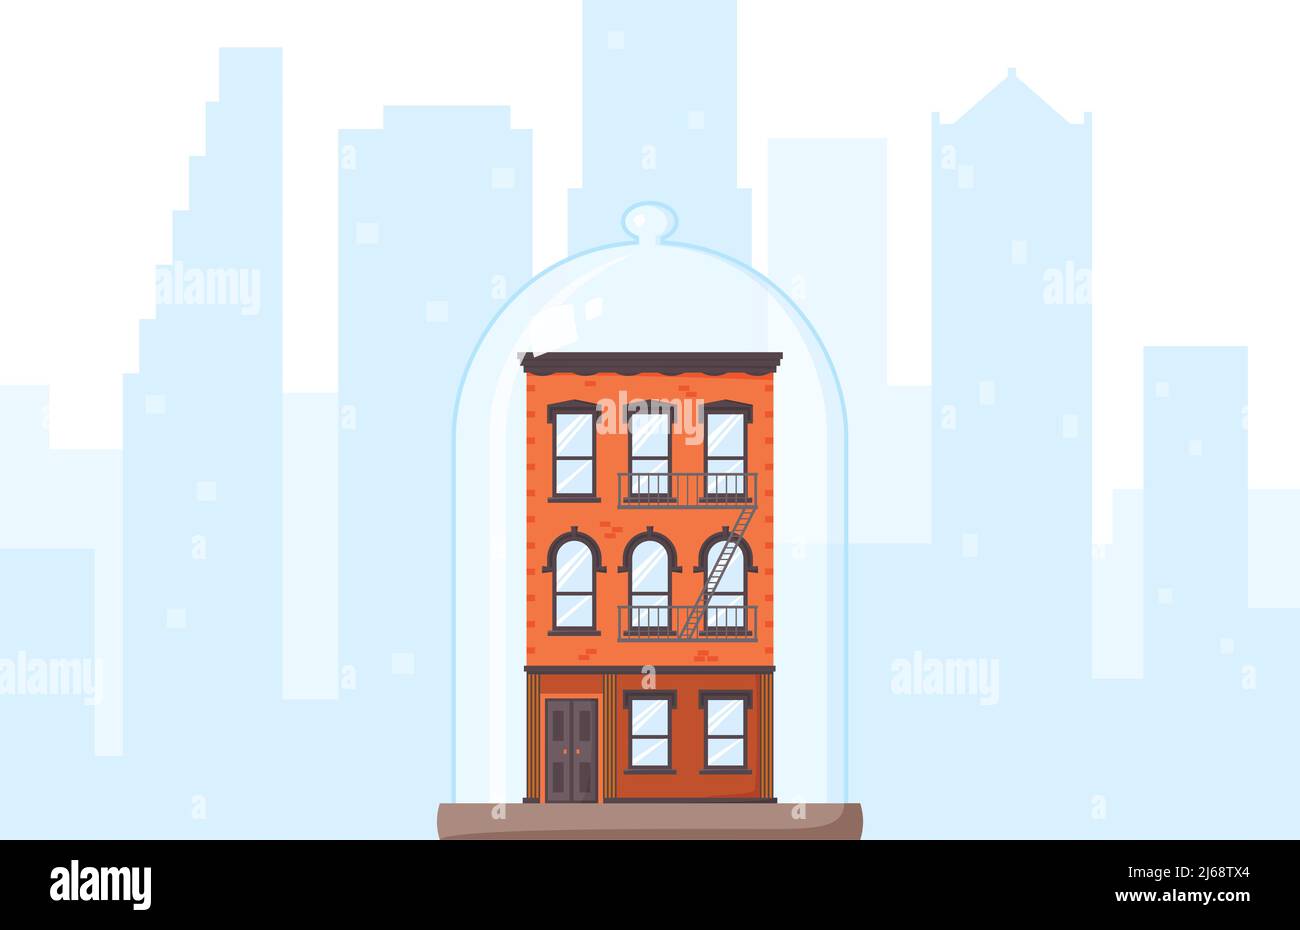 Old-fashioned house and city view silhouette. Brick building covered by glass dom. Rent control house concept. Rent stabilized apartment unit. Well Stock Vector